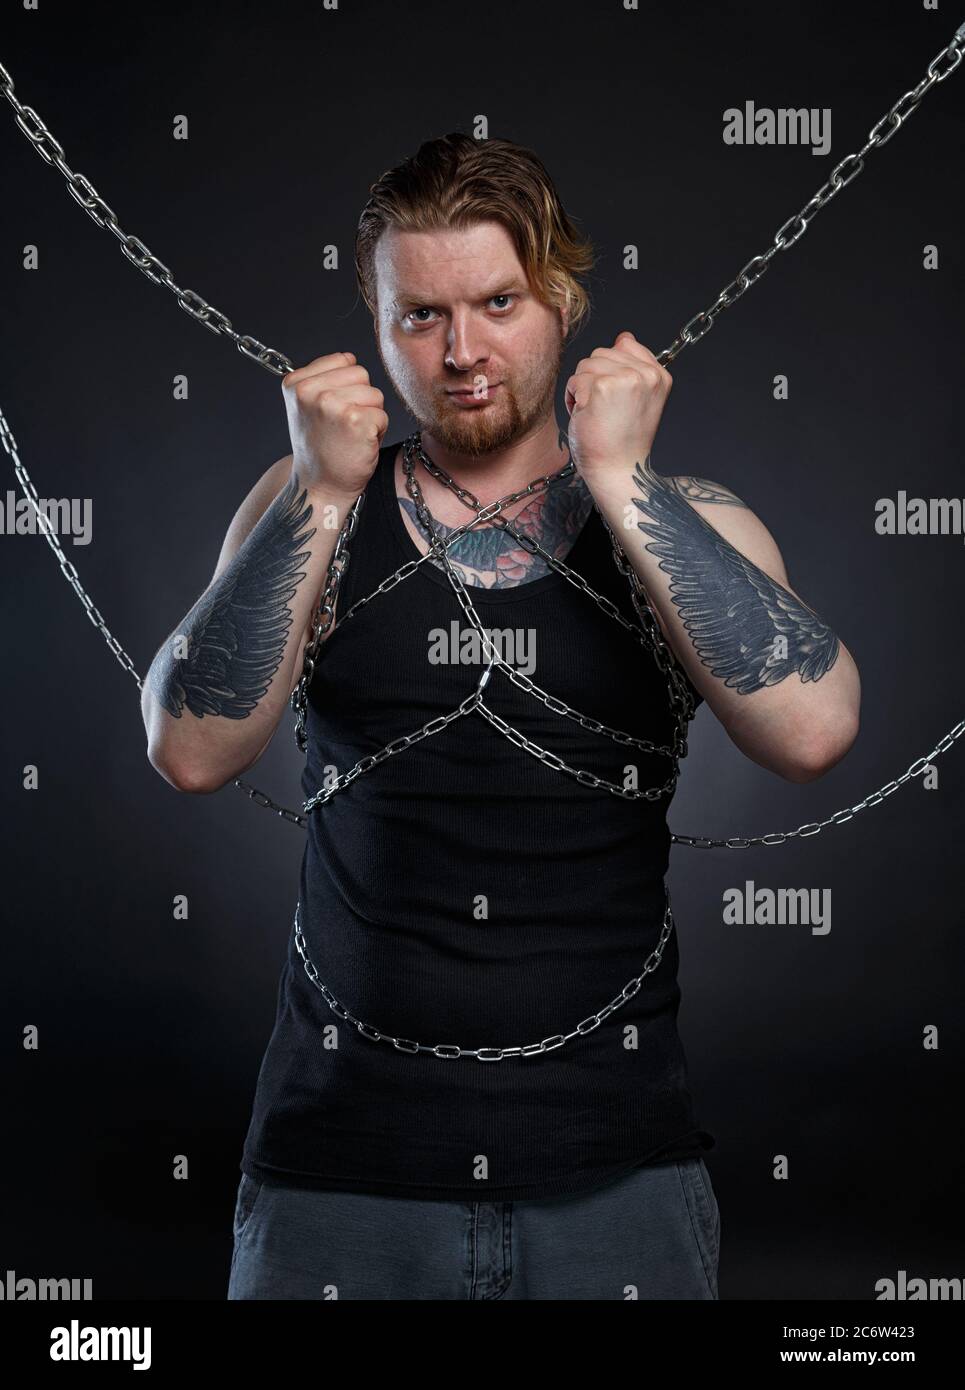 Photo of a brutal man bound in chains Stock Photo